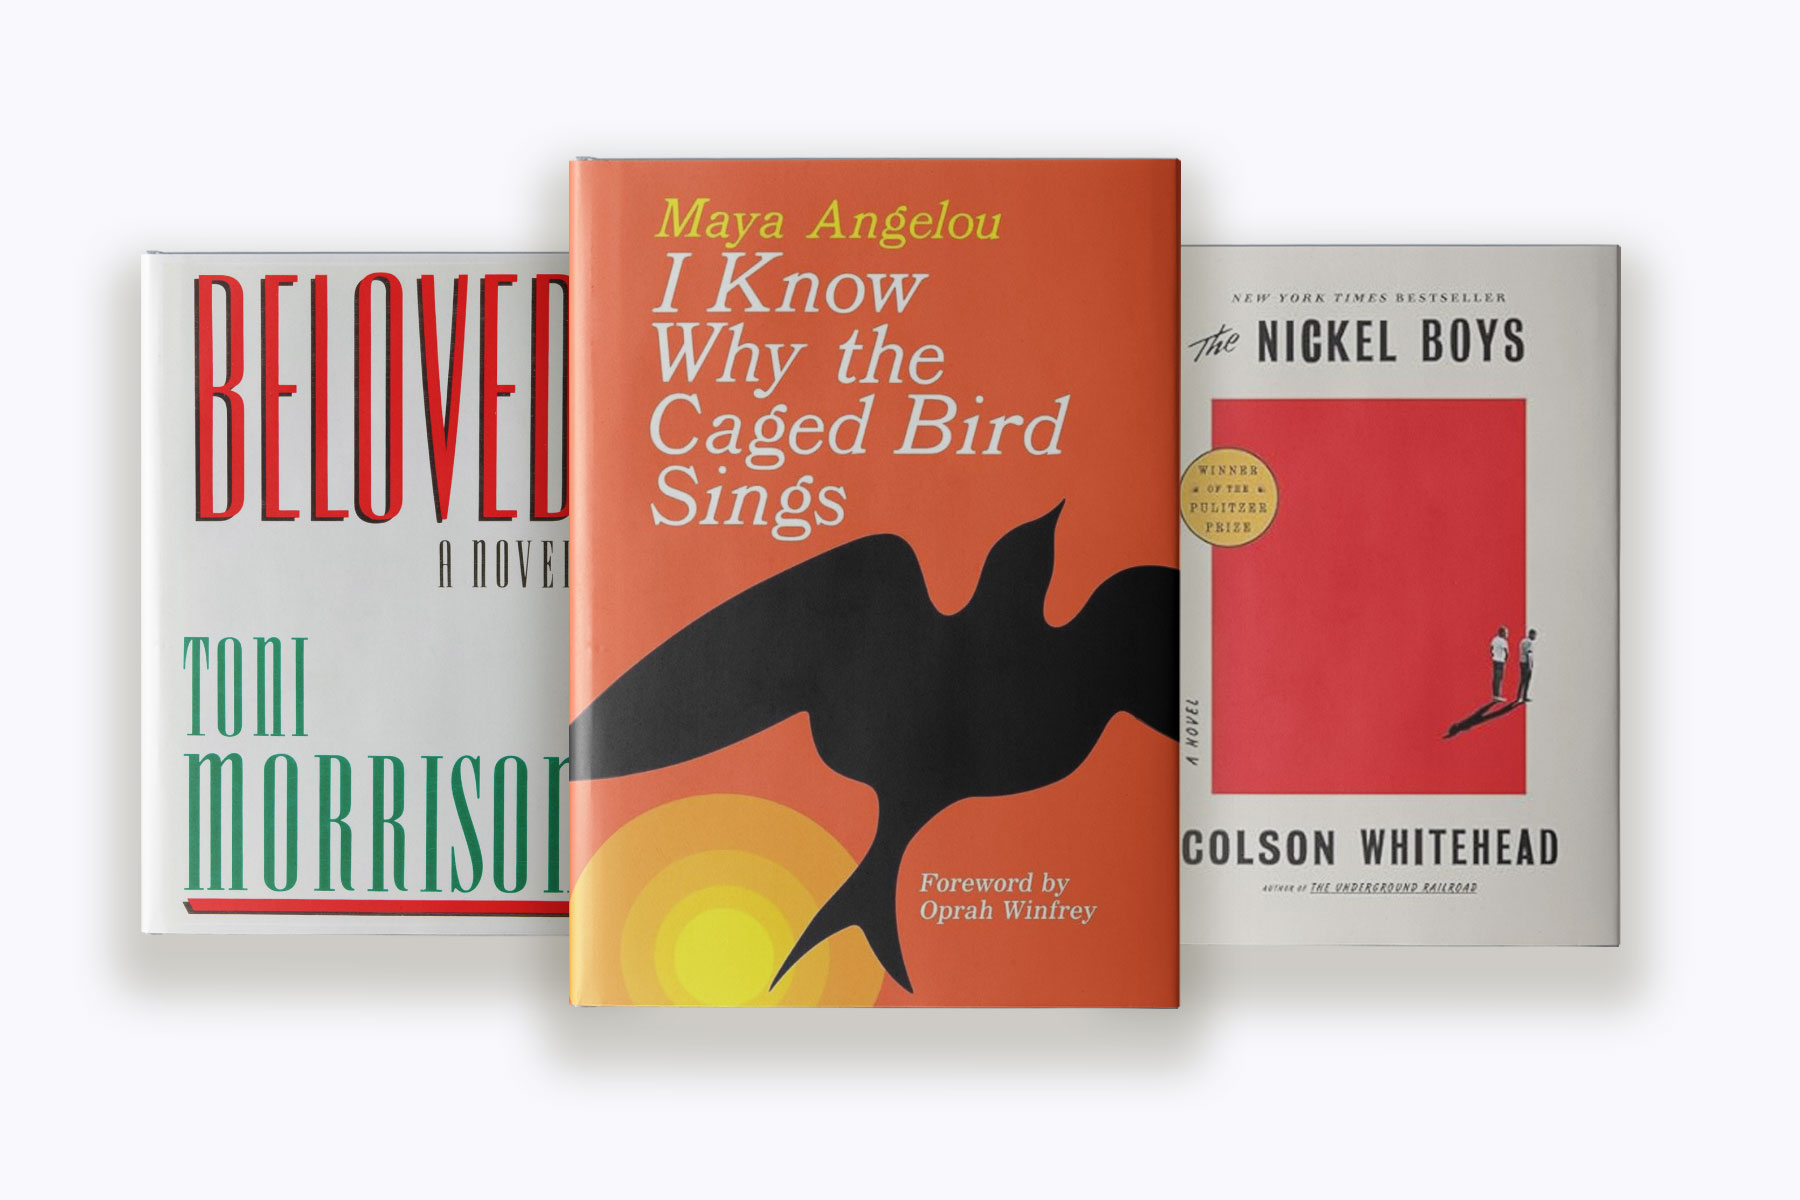 A compilation of book covers for Black History Month that include: Toni Morrison's "Beloved", Maya Angelou's "I Know Why the Caged Bird Sings", and Colson Whithead's "The Nickel Boys."